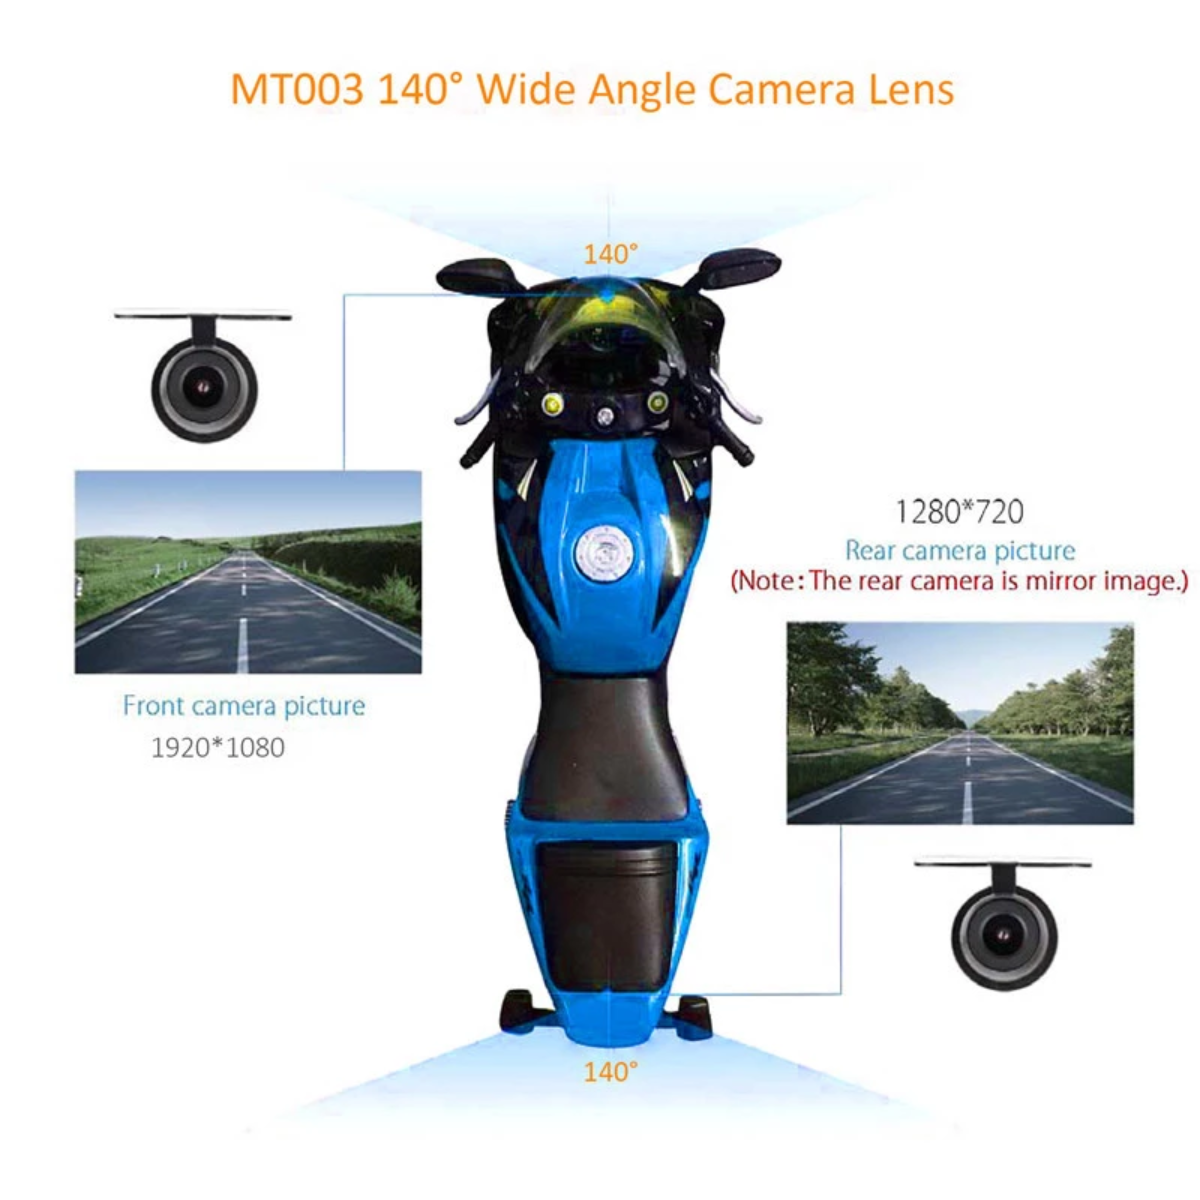 An image of a Water-resistant Motorcycle Dual Lens Dash Camera Video Recorder 4 Inch HD 1080P.